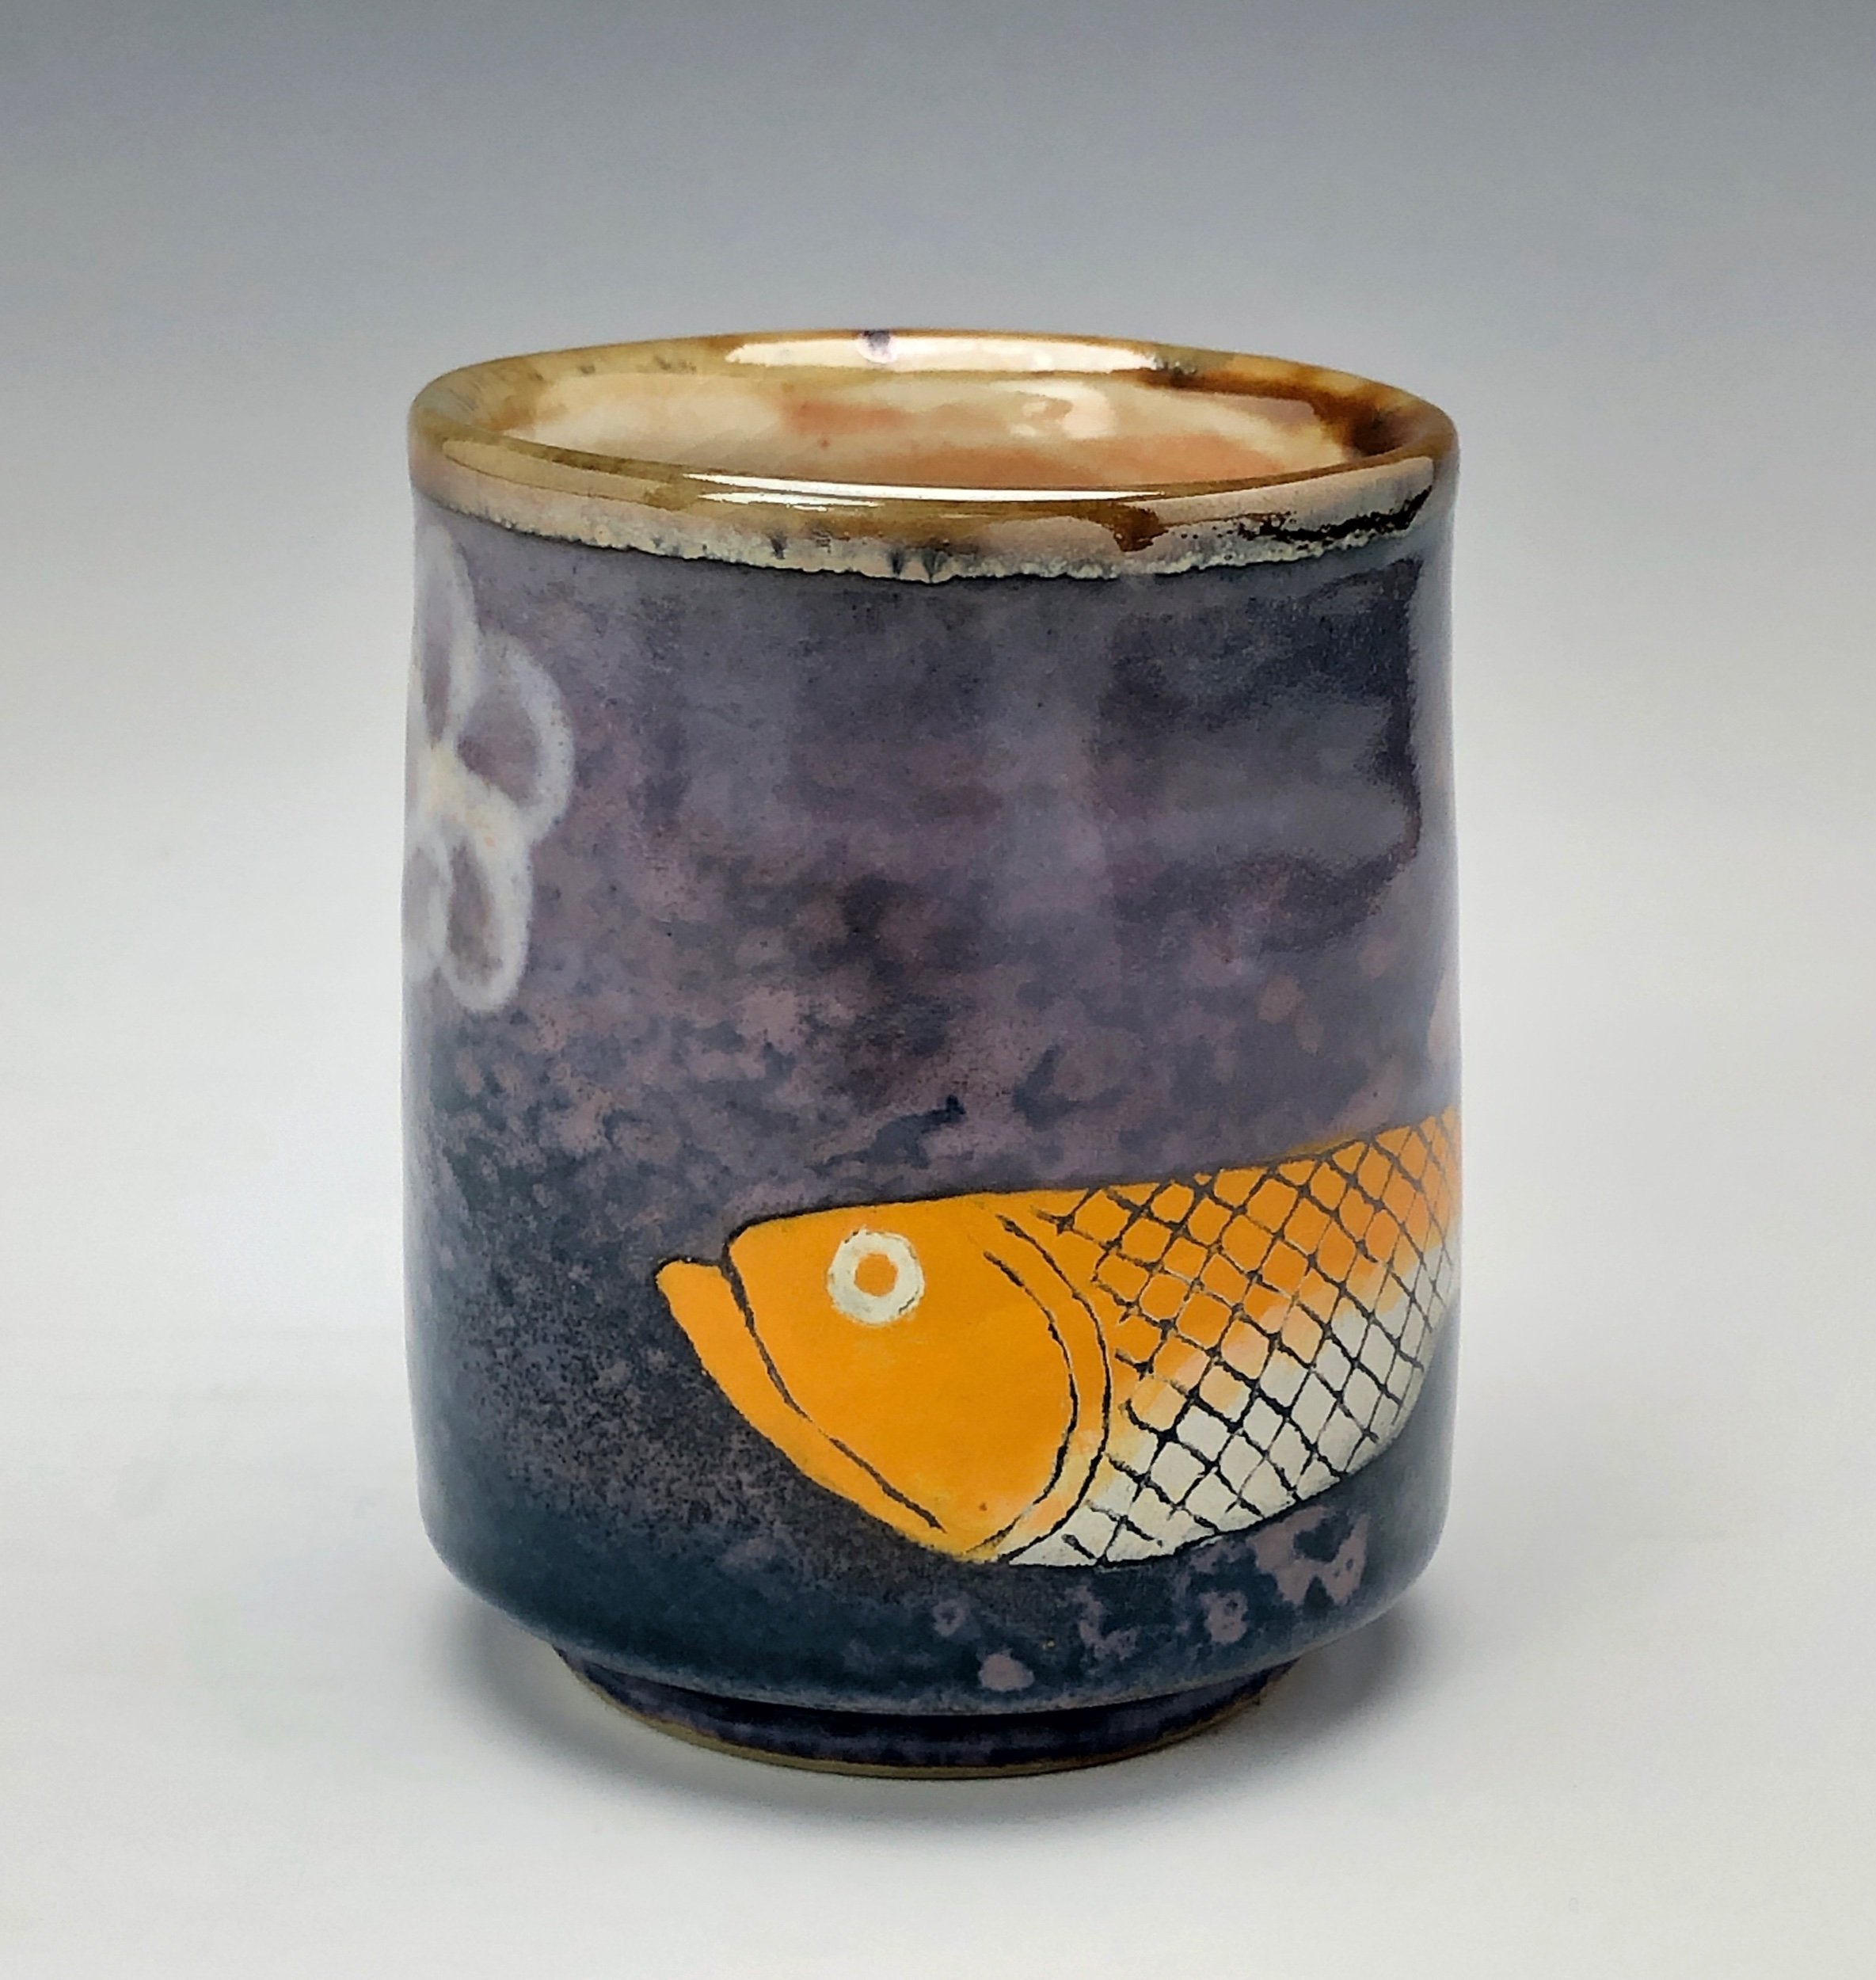  Bruce Gholson, Bulldog Pottery, Seagrove, North Carolina  Yunomi 6- Casual drinking cup made from porcelain. This cup is glazed with a lavender blue shino with a drawn fish in orange over glaze. 